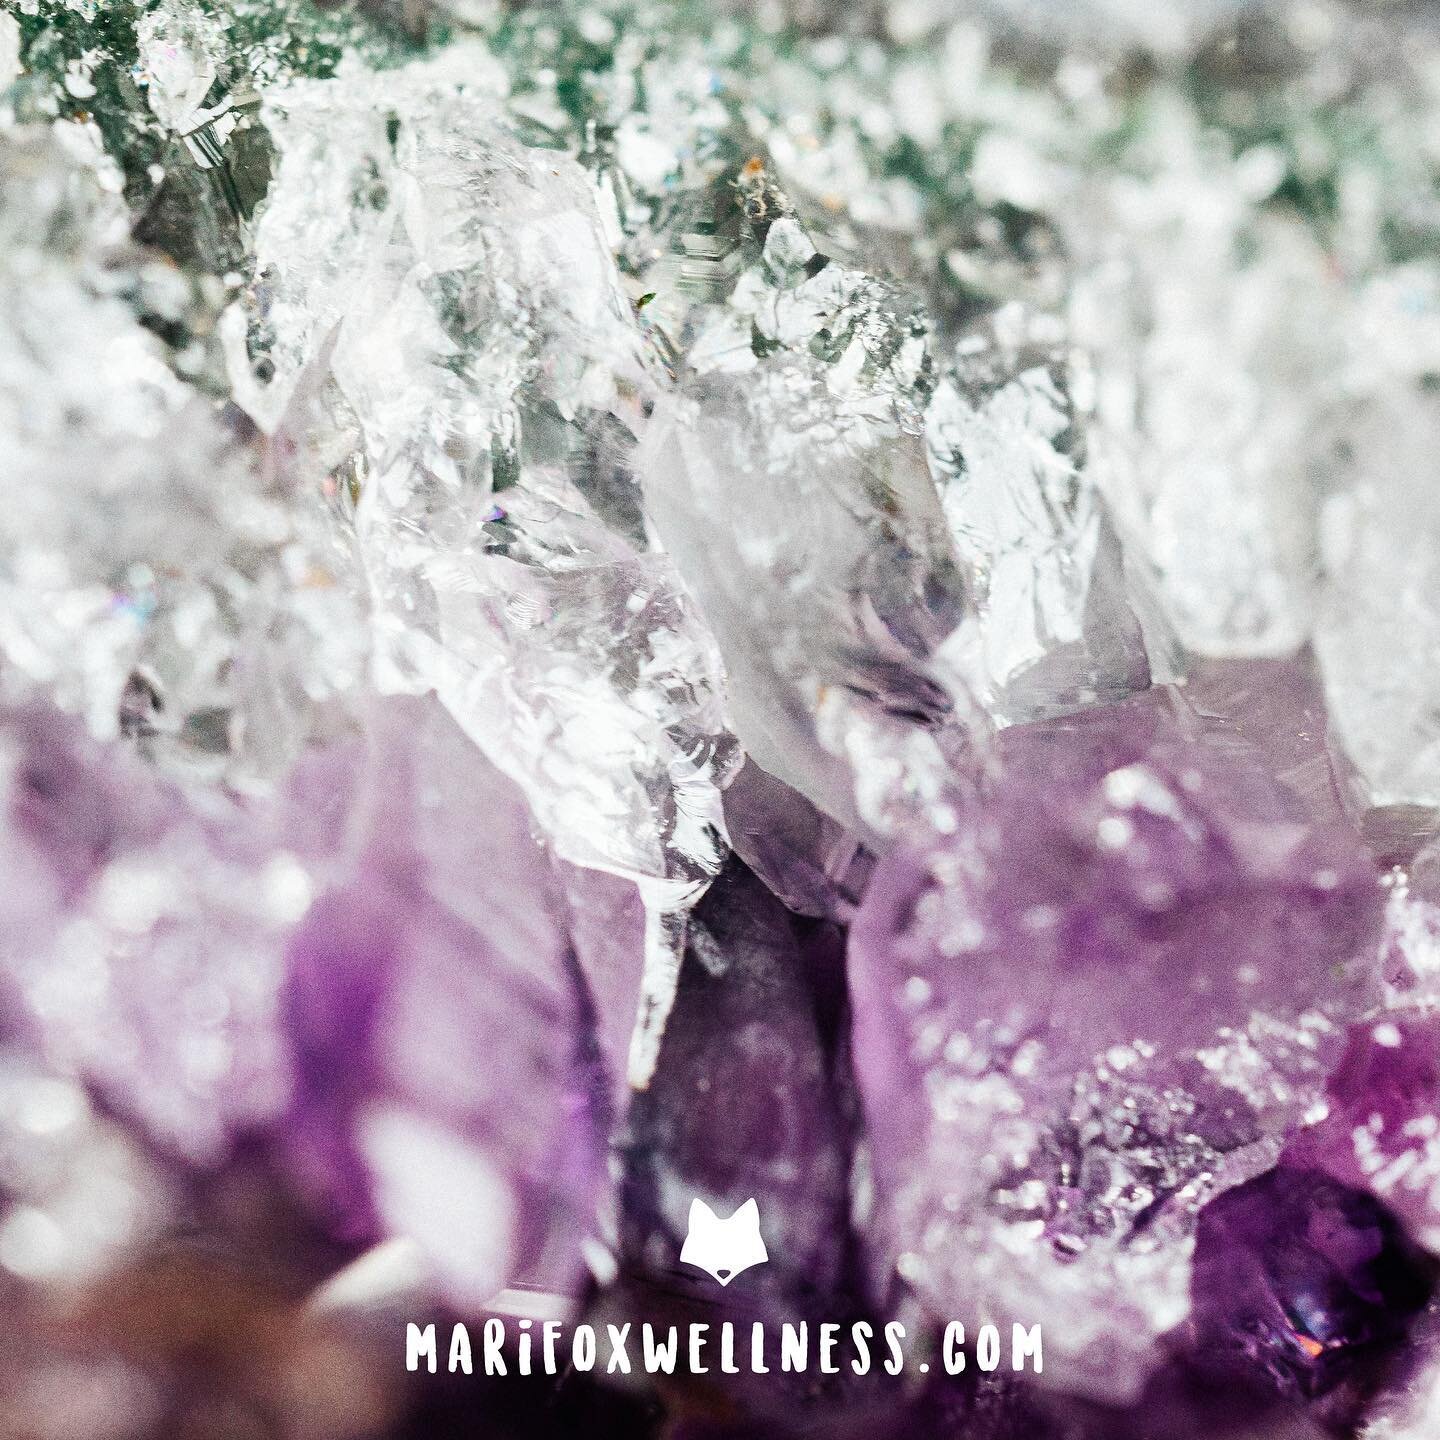 Have you tried highly pairing crystals with your meditation practic? 

Pick out ones you love and speak to you. Put them in your pockets or sit and hold them in our hand(s) as you meditate in your car, on a cushion or couch, in your bed, at your desk